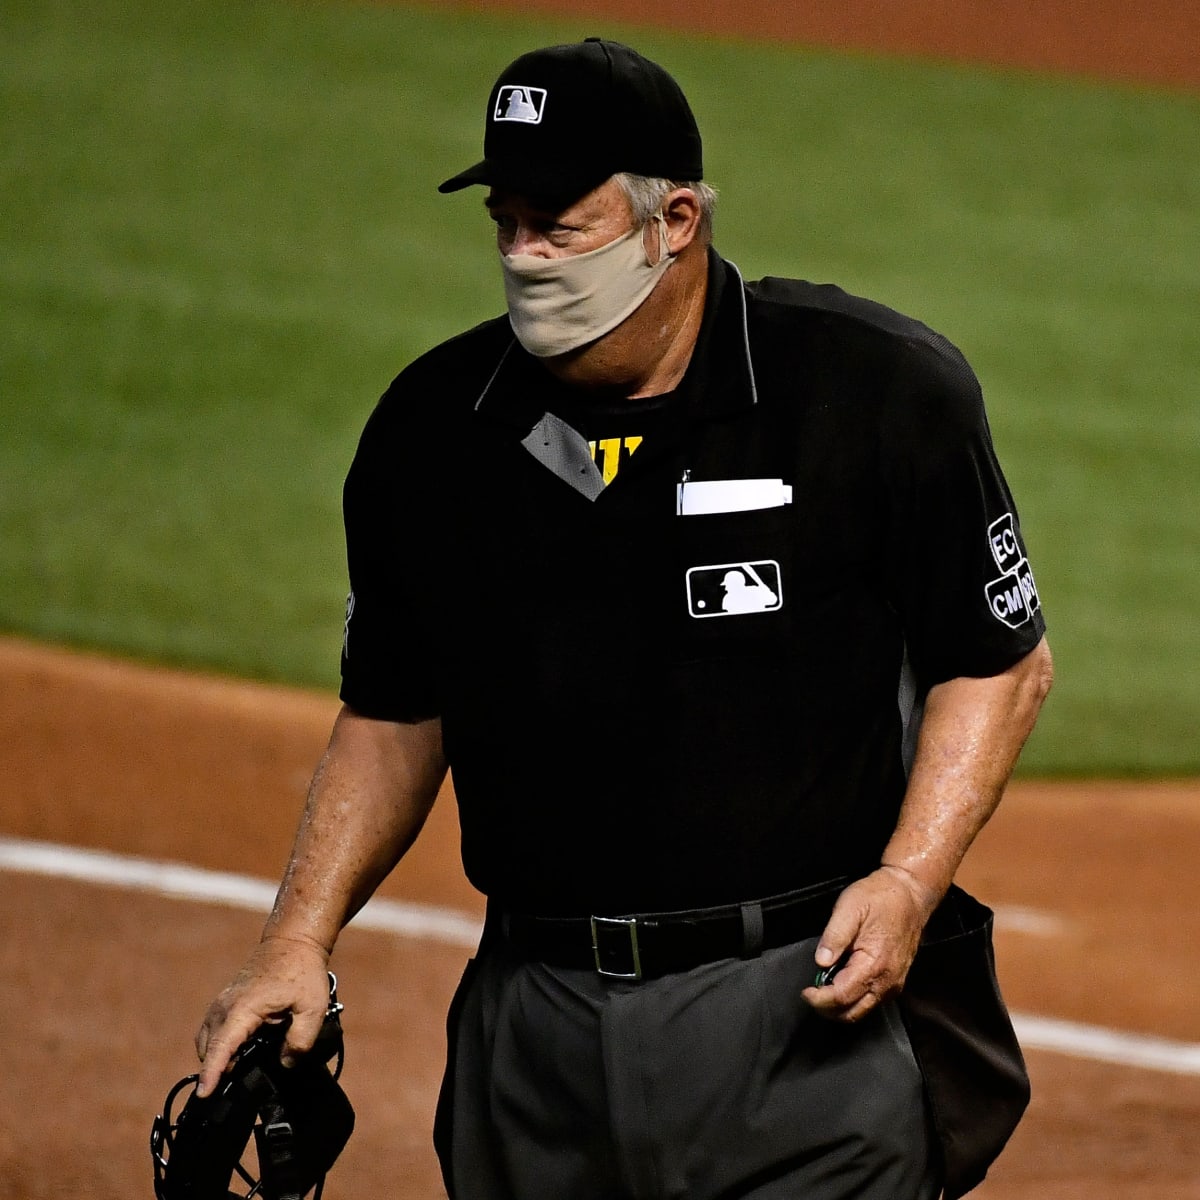 MLB umpire Joe West officially retires after 45 years - Sports Illustrated